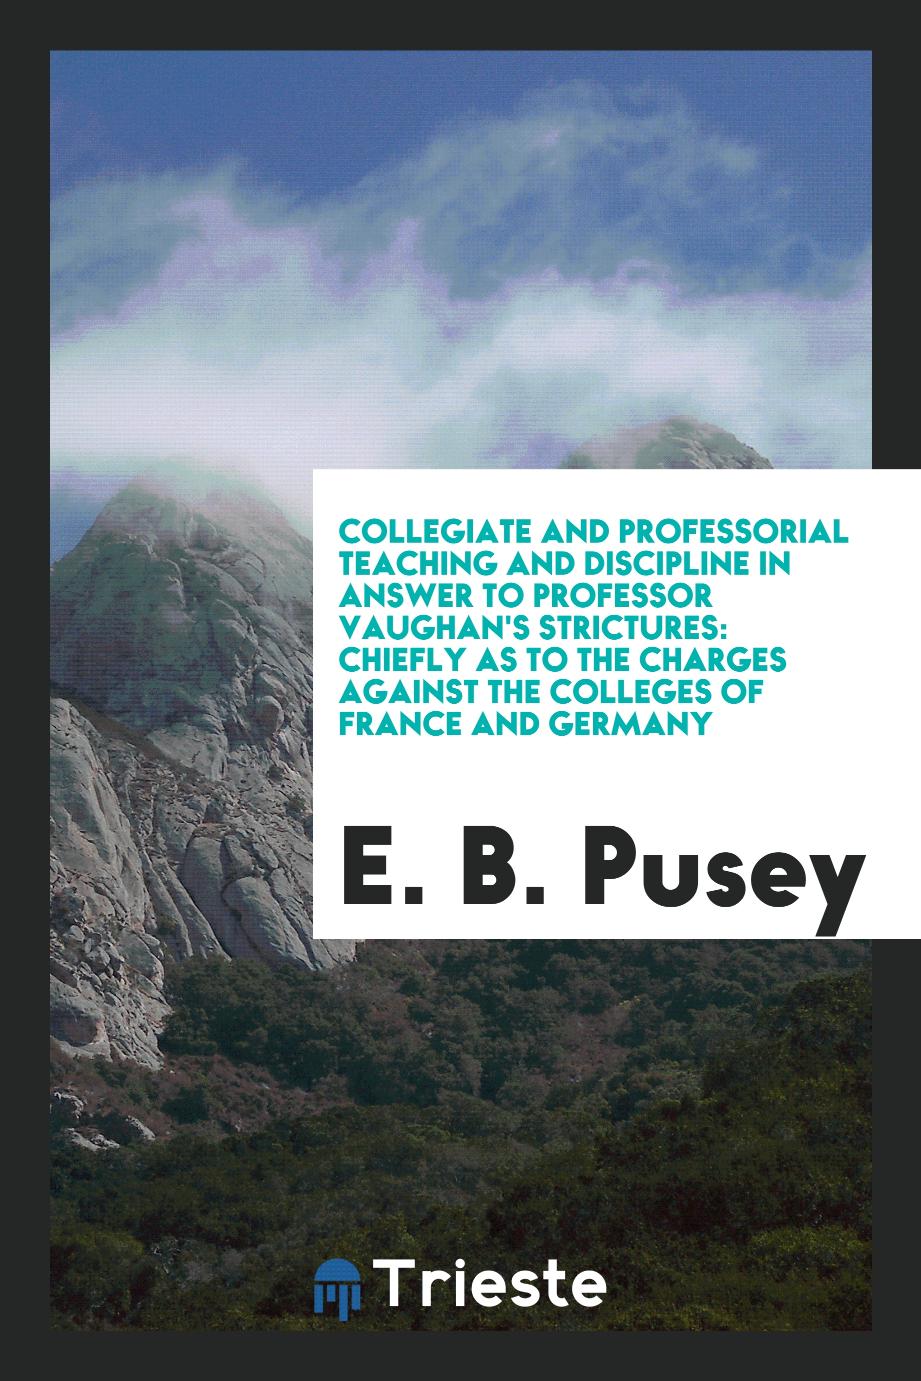 Collegiate and Professorial Teaching and Discipline in Answer to Professor Vaughan's Strictures: Chiefly as to the Charges Against the Colleges of France and Germany